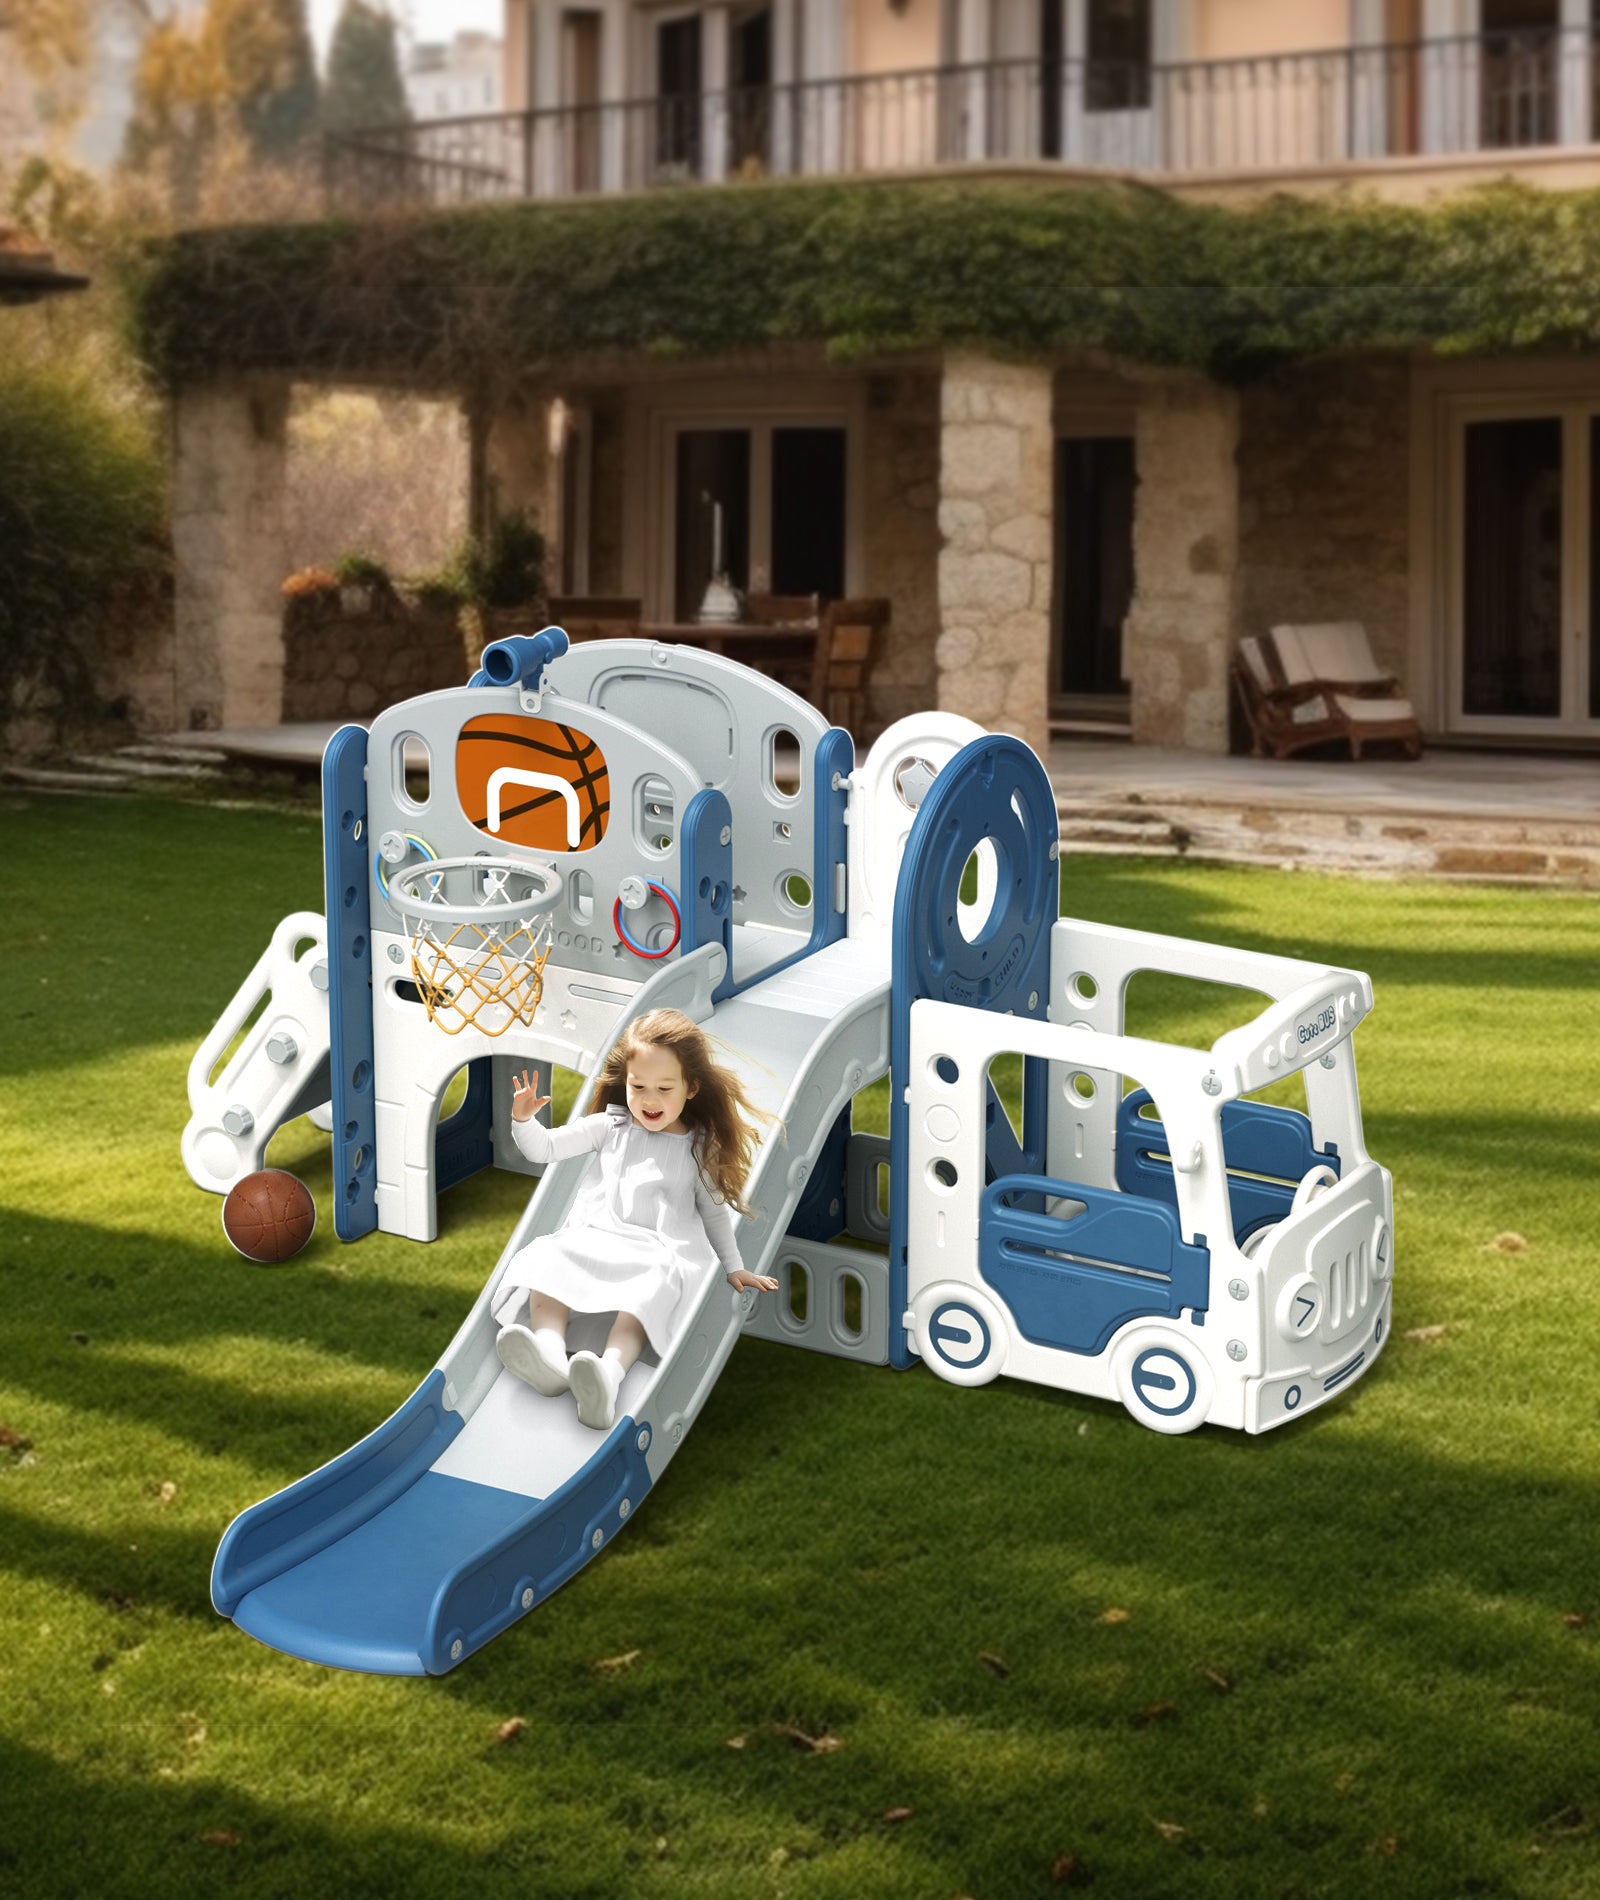 XJD 10-in-1 Toddler Slide Set Freestanding Climber Playset with Basketball Hoop and Ball Versatile Playset for Kids, Blue Grey